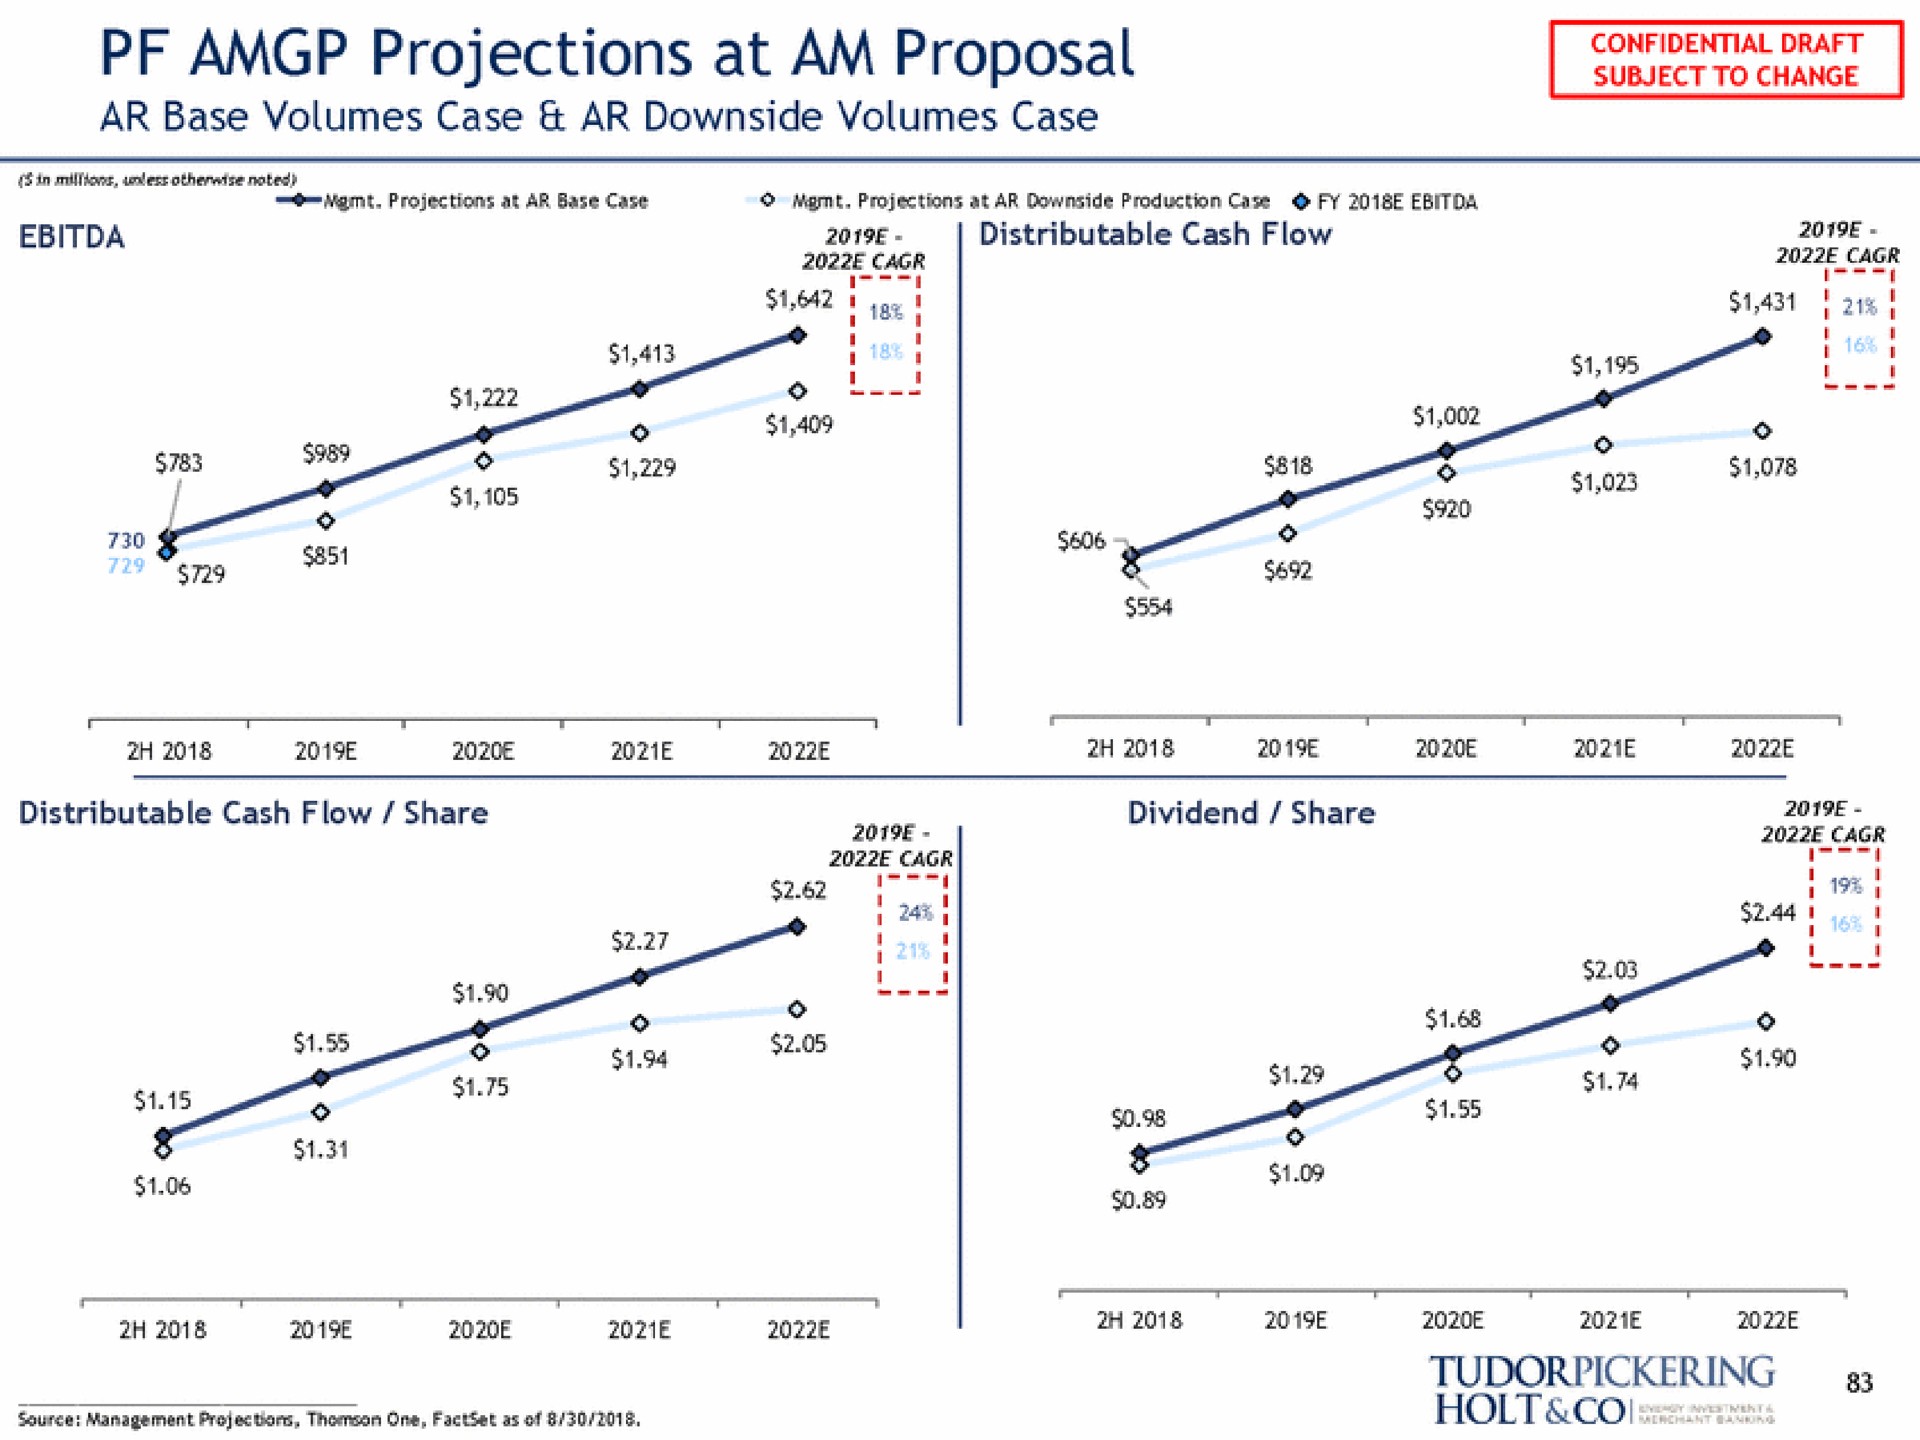 projections at am proposal | Tudor, Pickering, Holt & Co